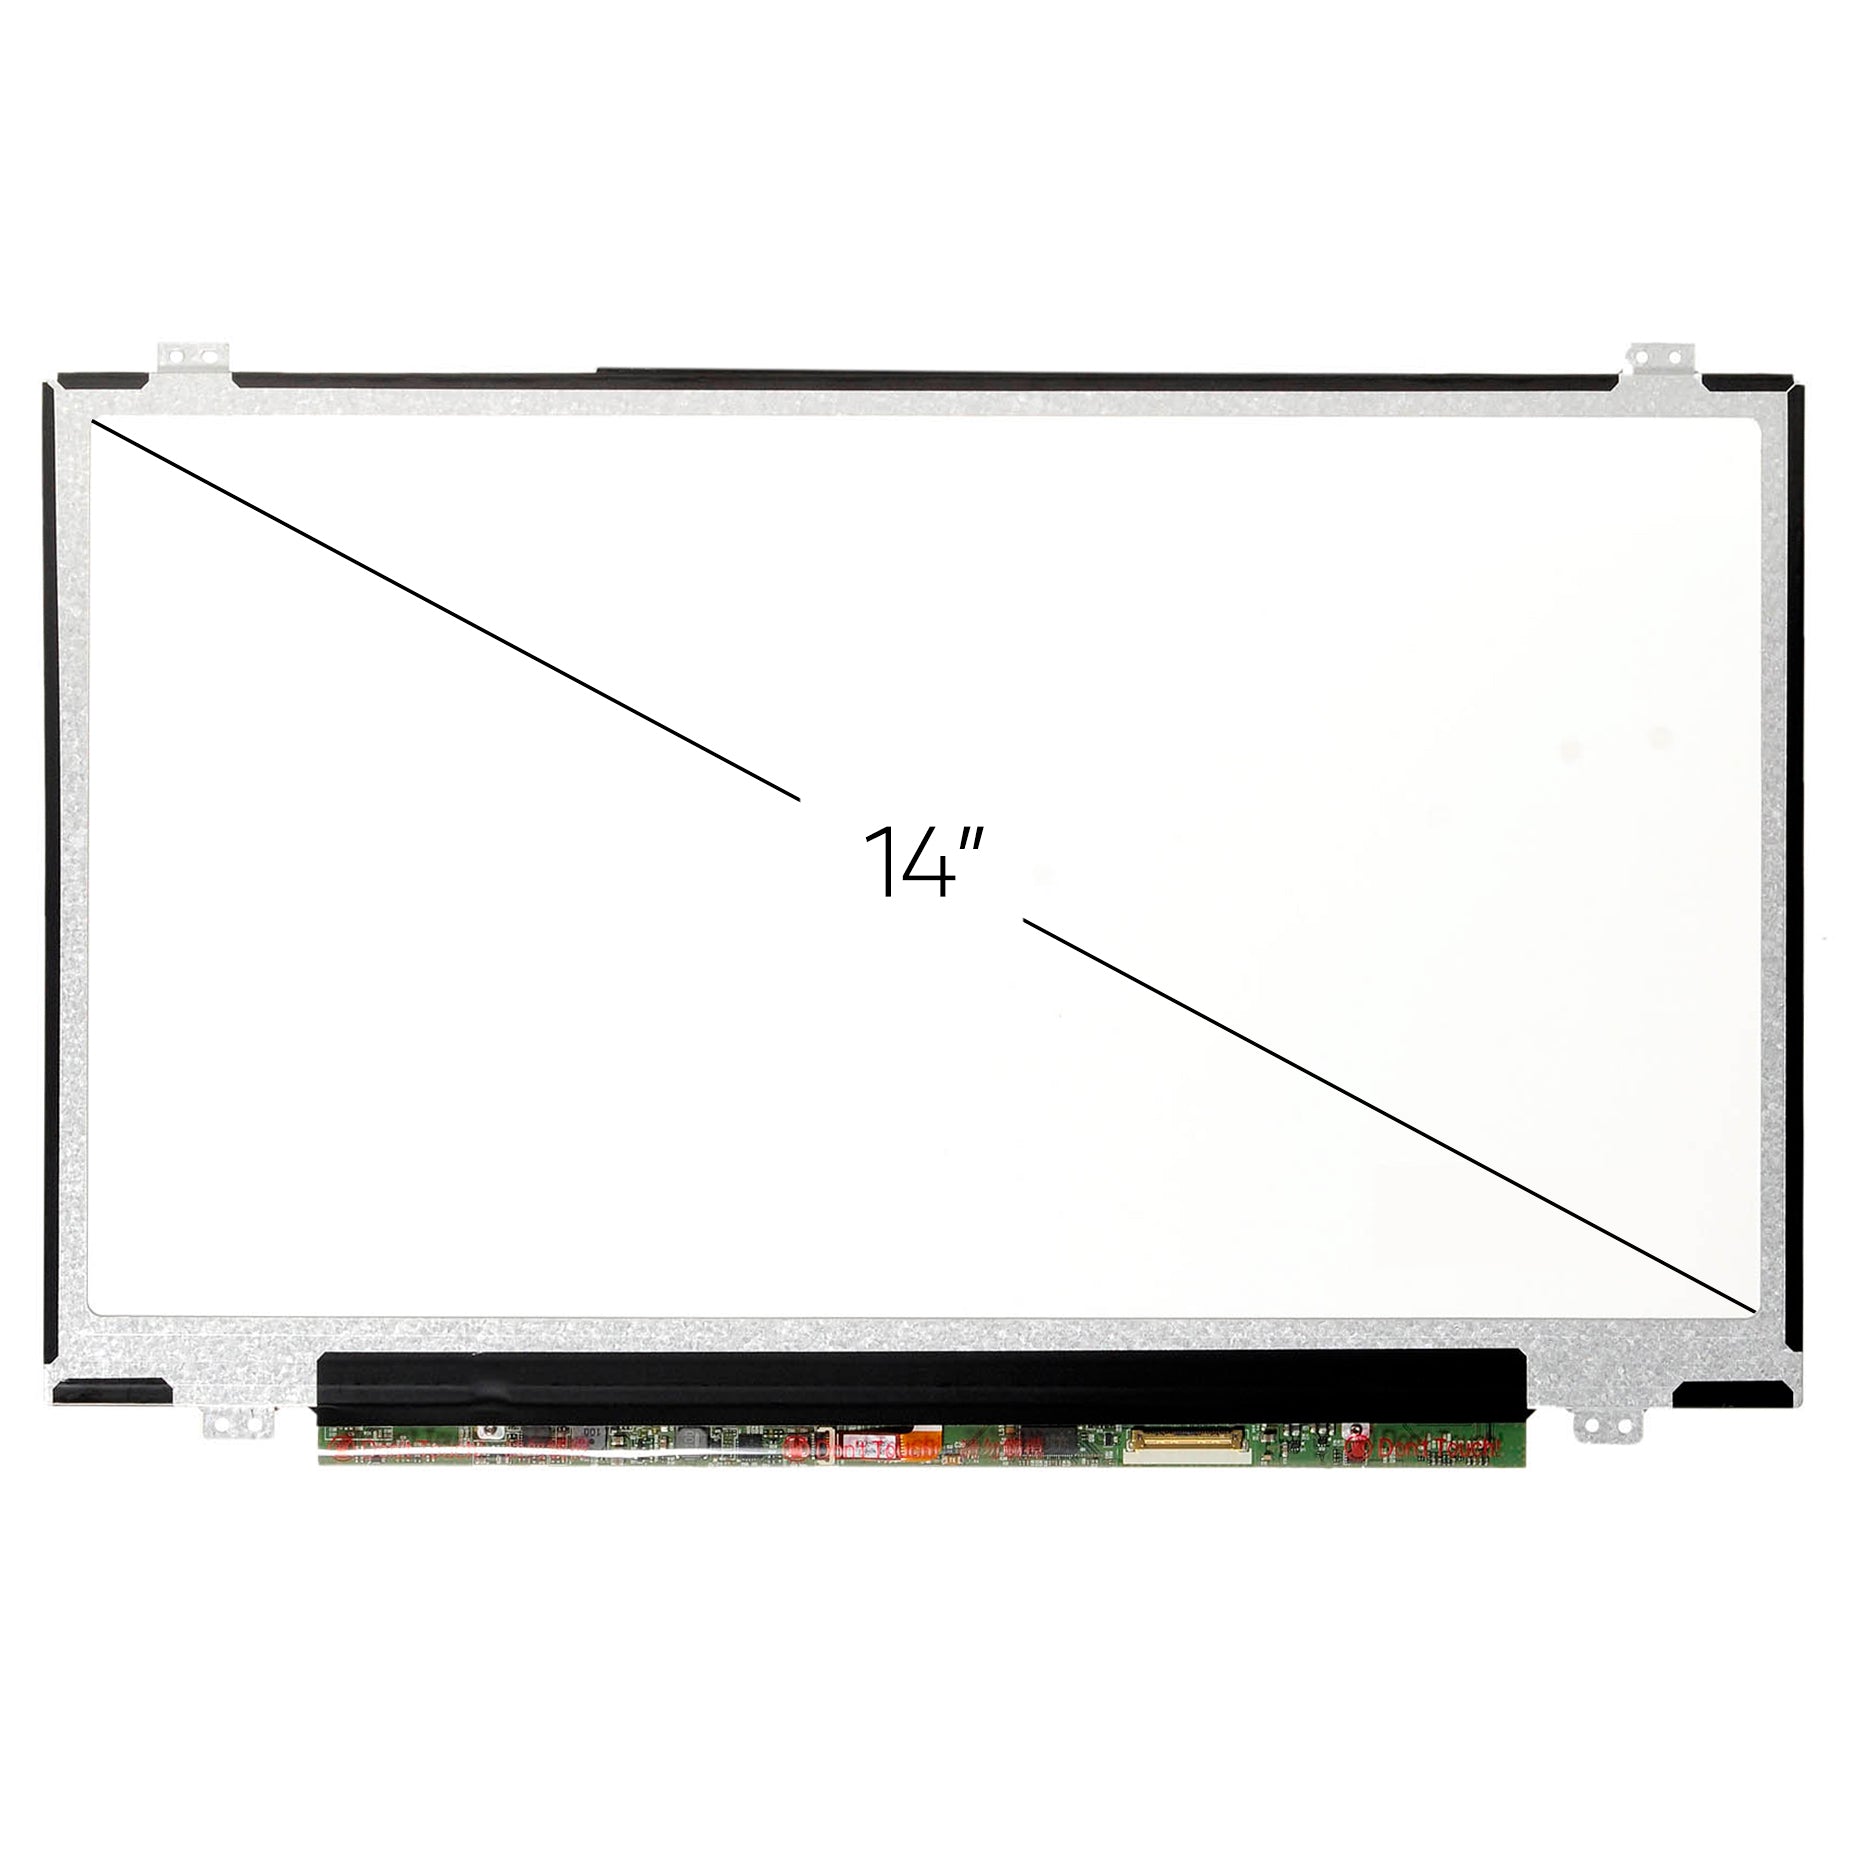 Screen Replacement for Toshiba Satellite E45-B4200 FHD 1920x1080 IPS Matte LCD LED Display